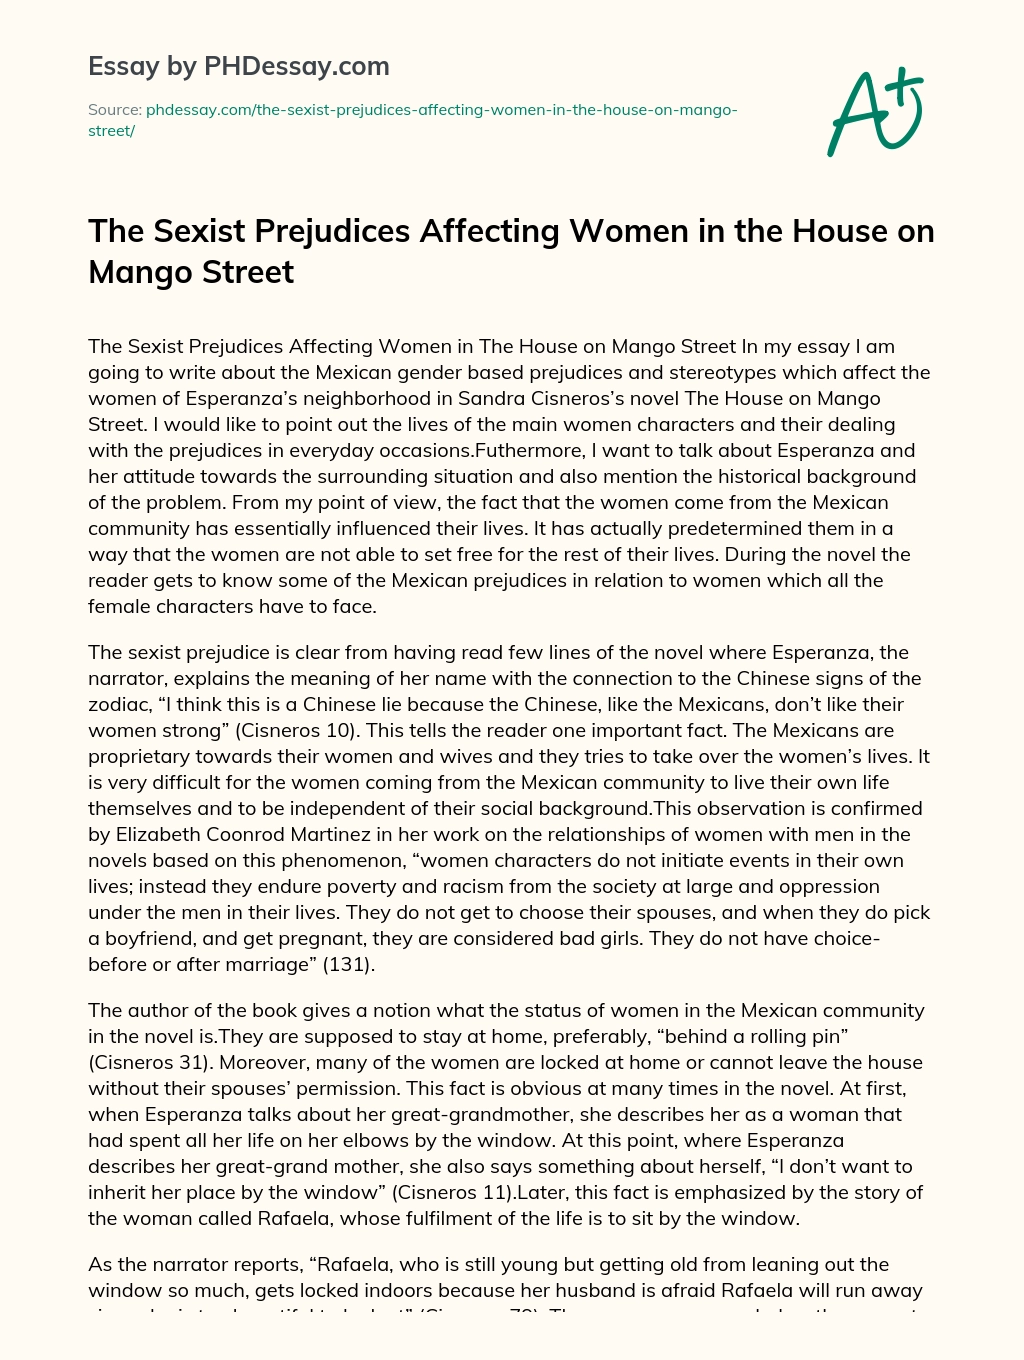 The Sexist Prejudices Affecting Women in the House on Mango Street essay